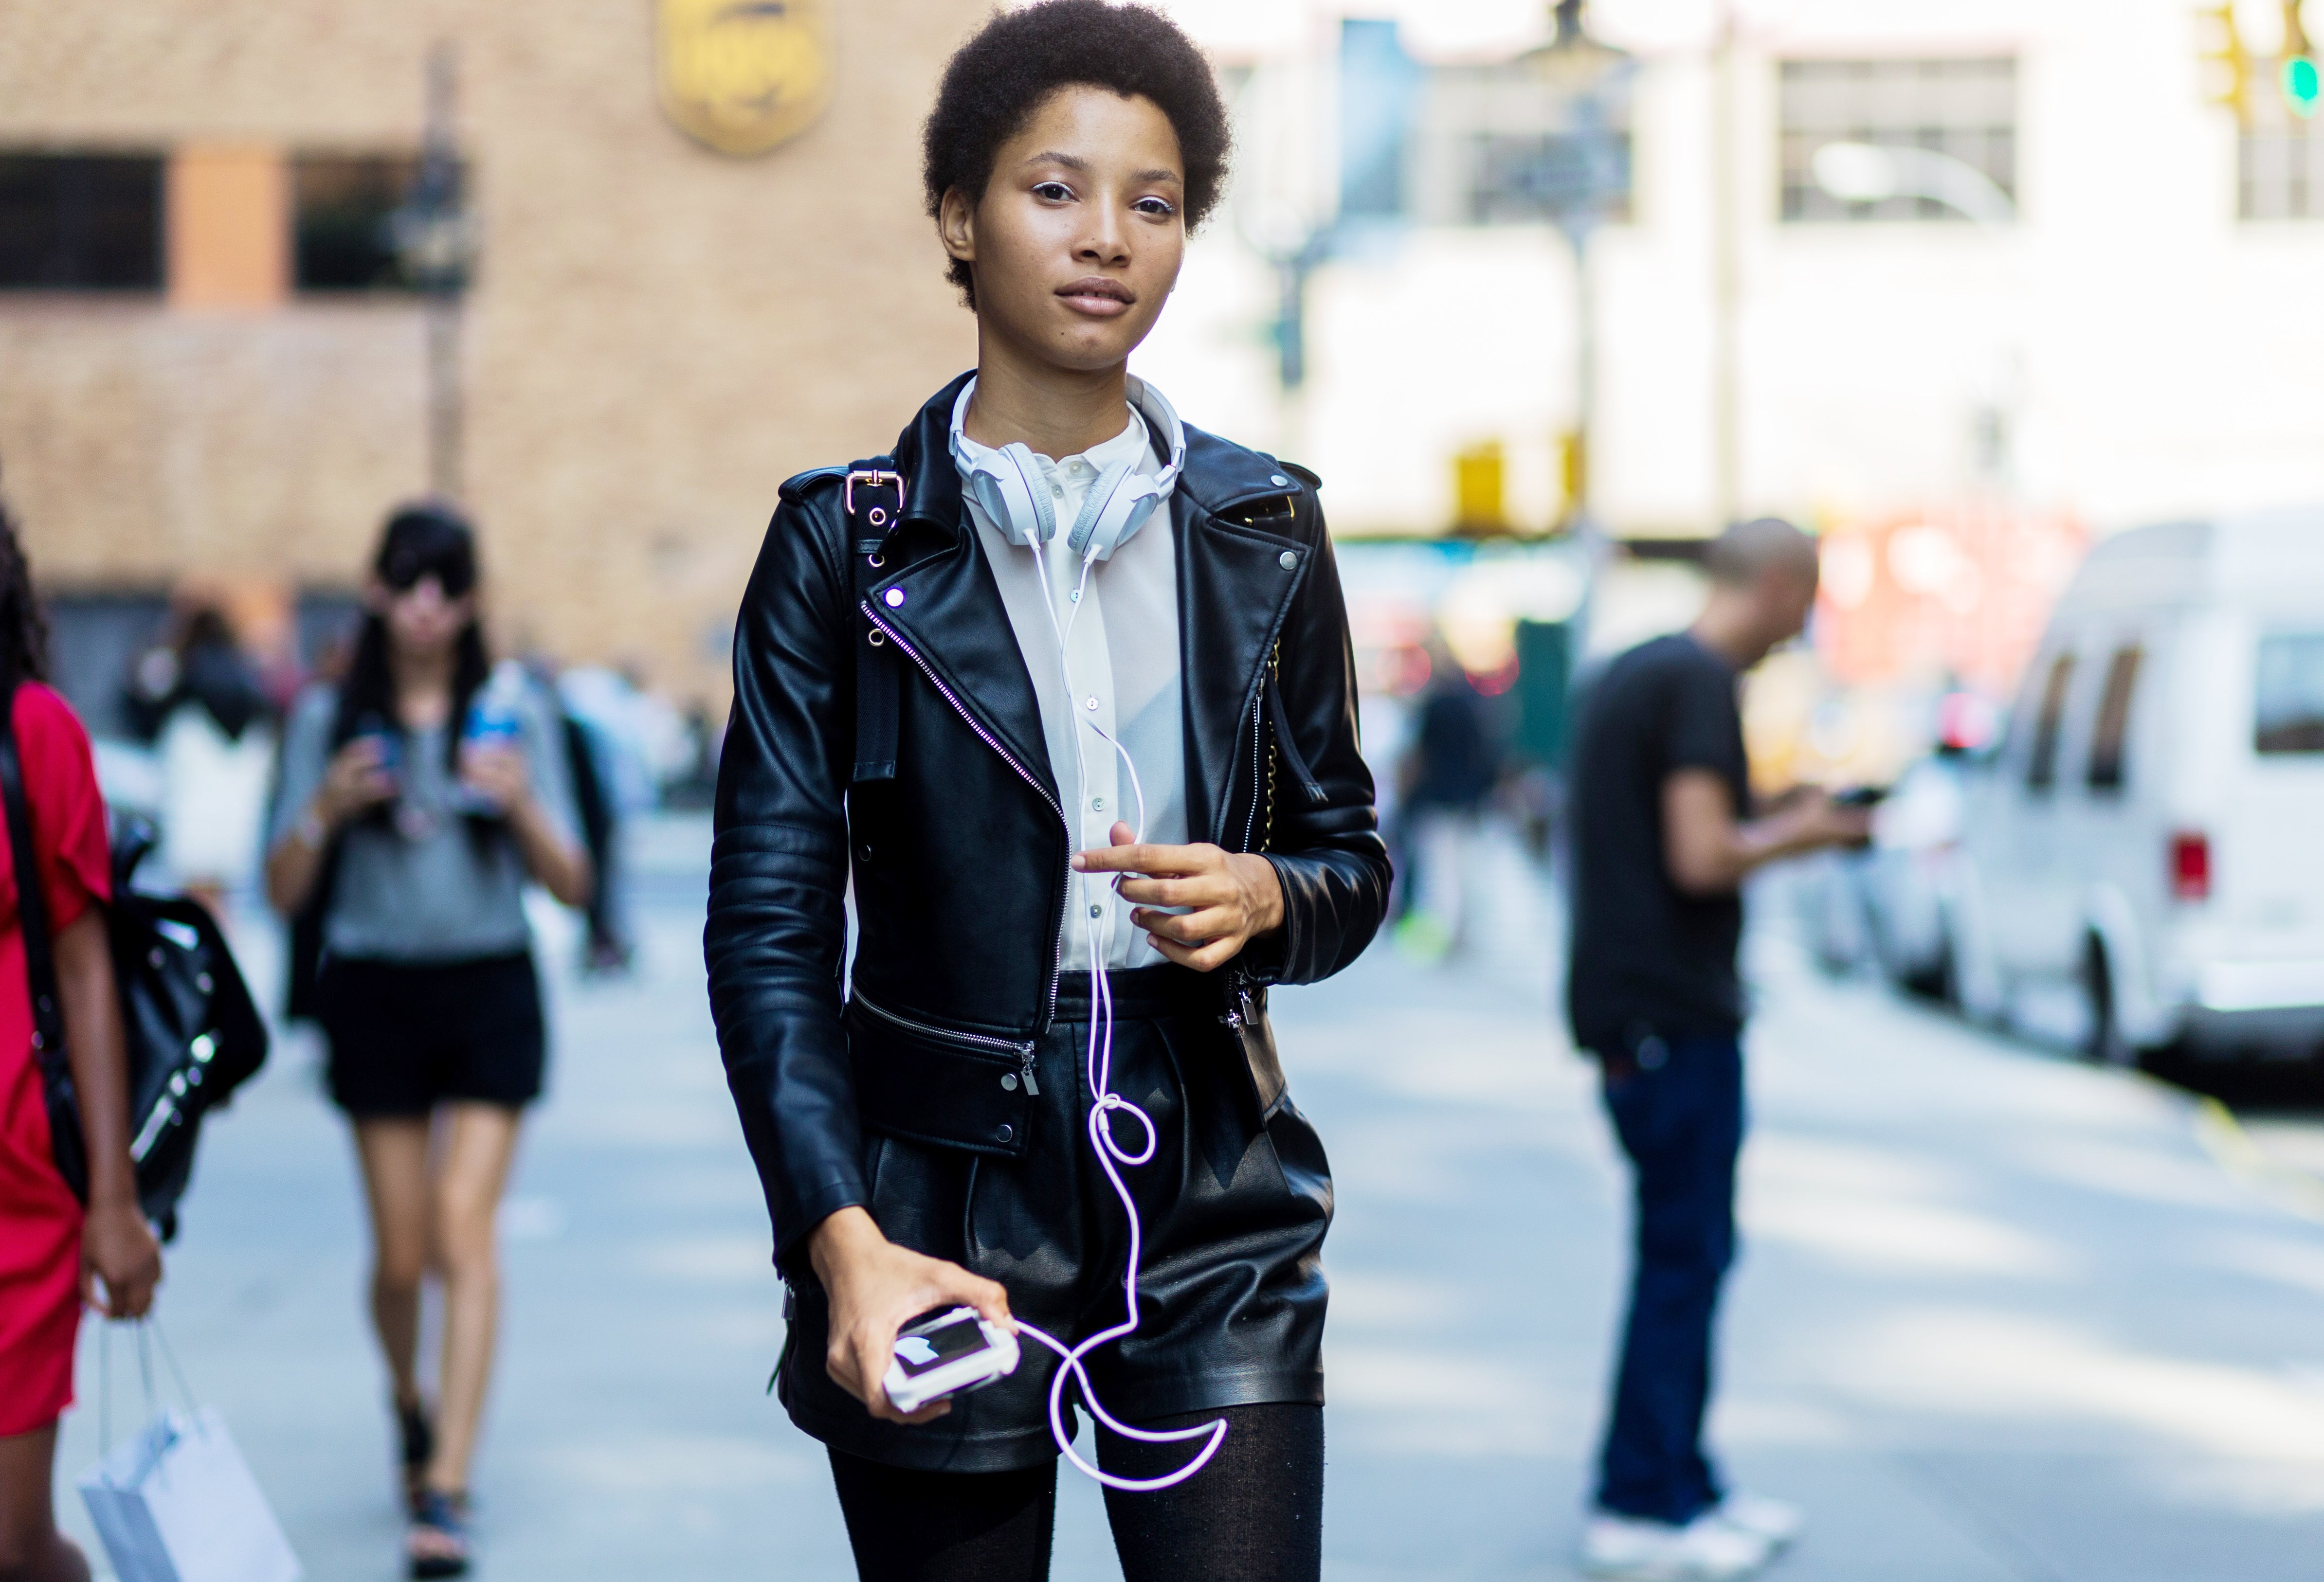 Our Fave Street Style Looks From Fashion Week
